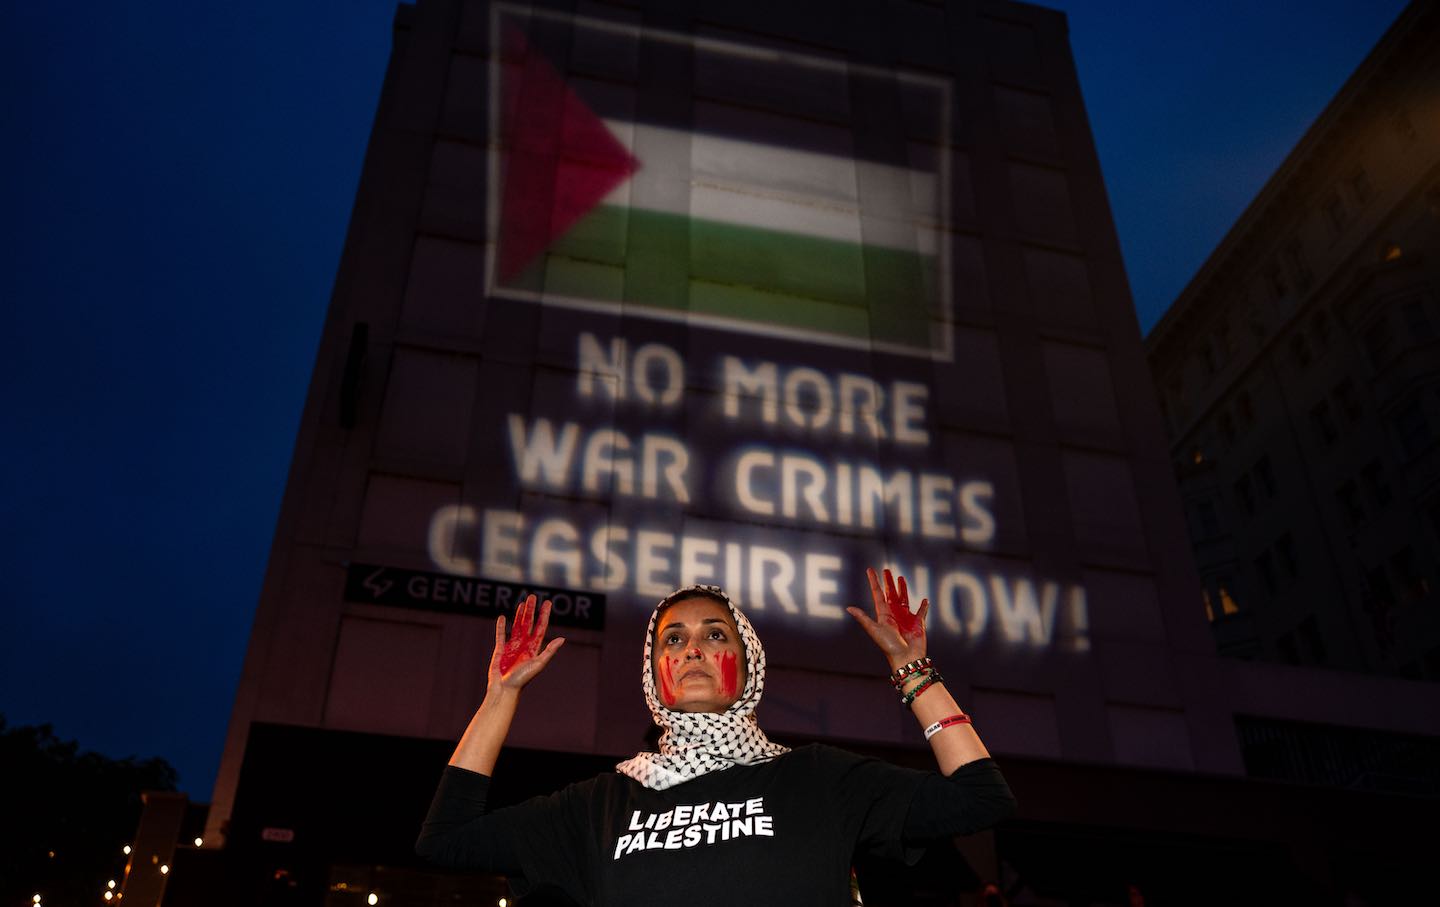 Pro-Palestinian demonstrators protest outside of the Washington Hilton, the site of the Annual White House Correspondents Dinner, on April 27, 2024 in Washington, D.C.